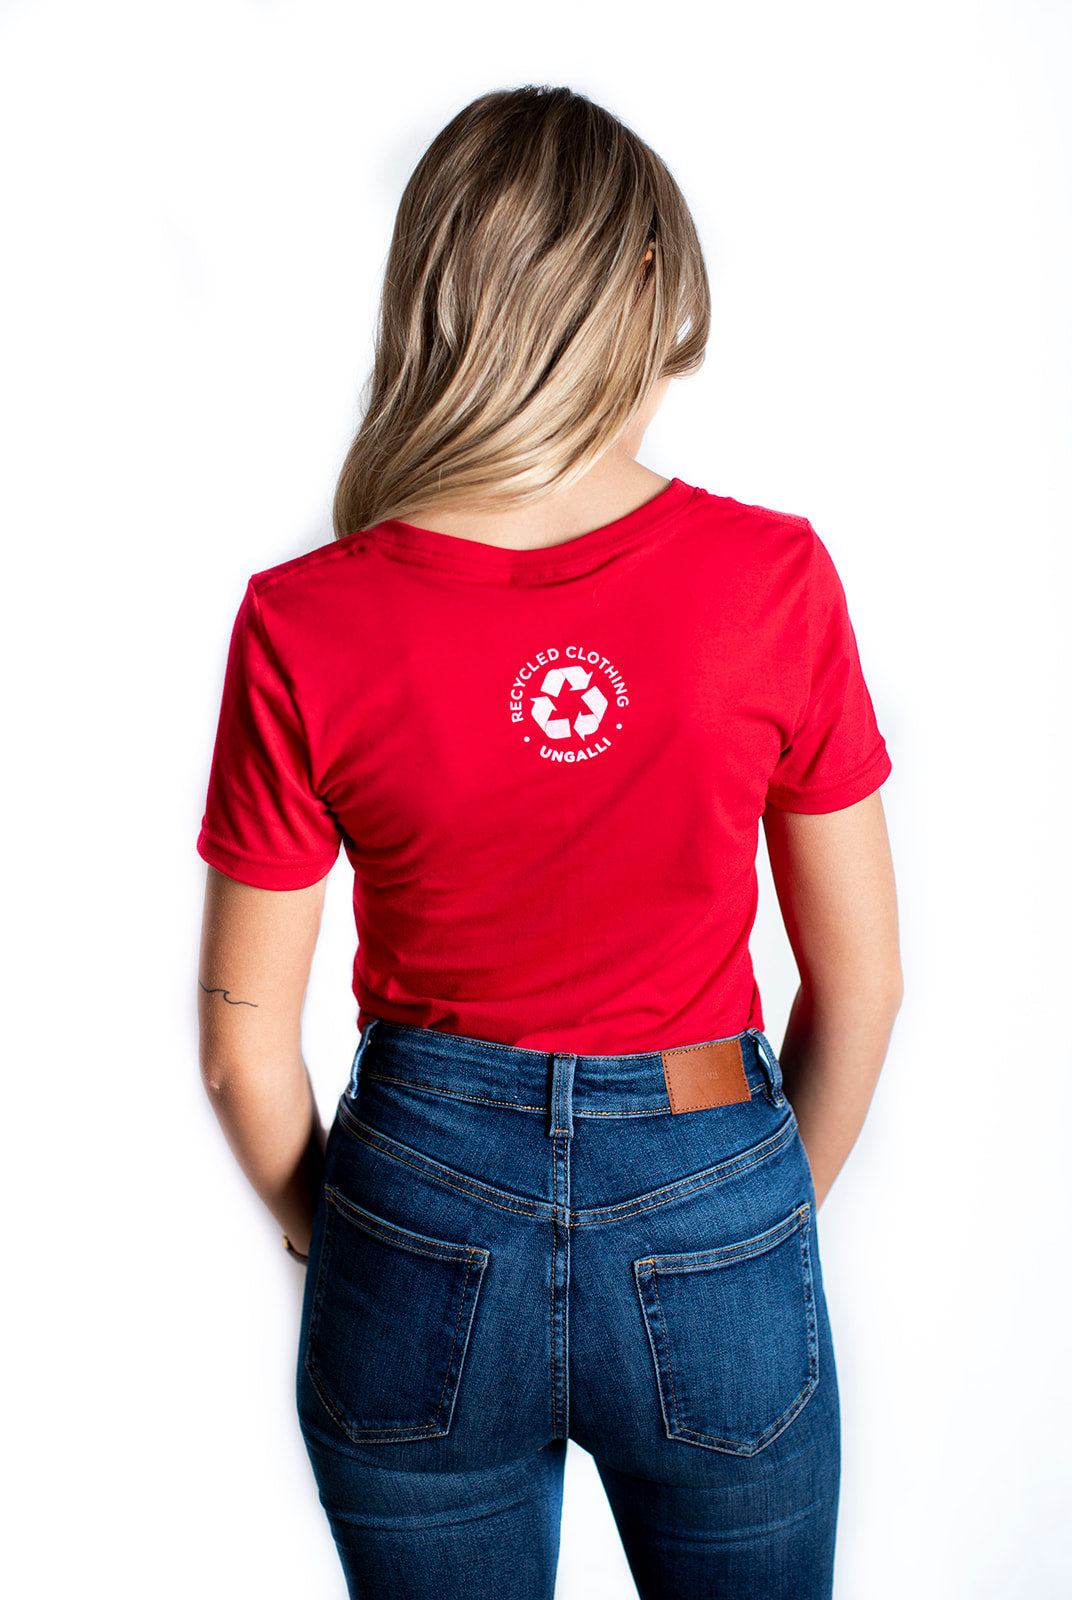 Women's organic red short sleeve t-shirt with white Ungalli logo on front